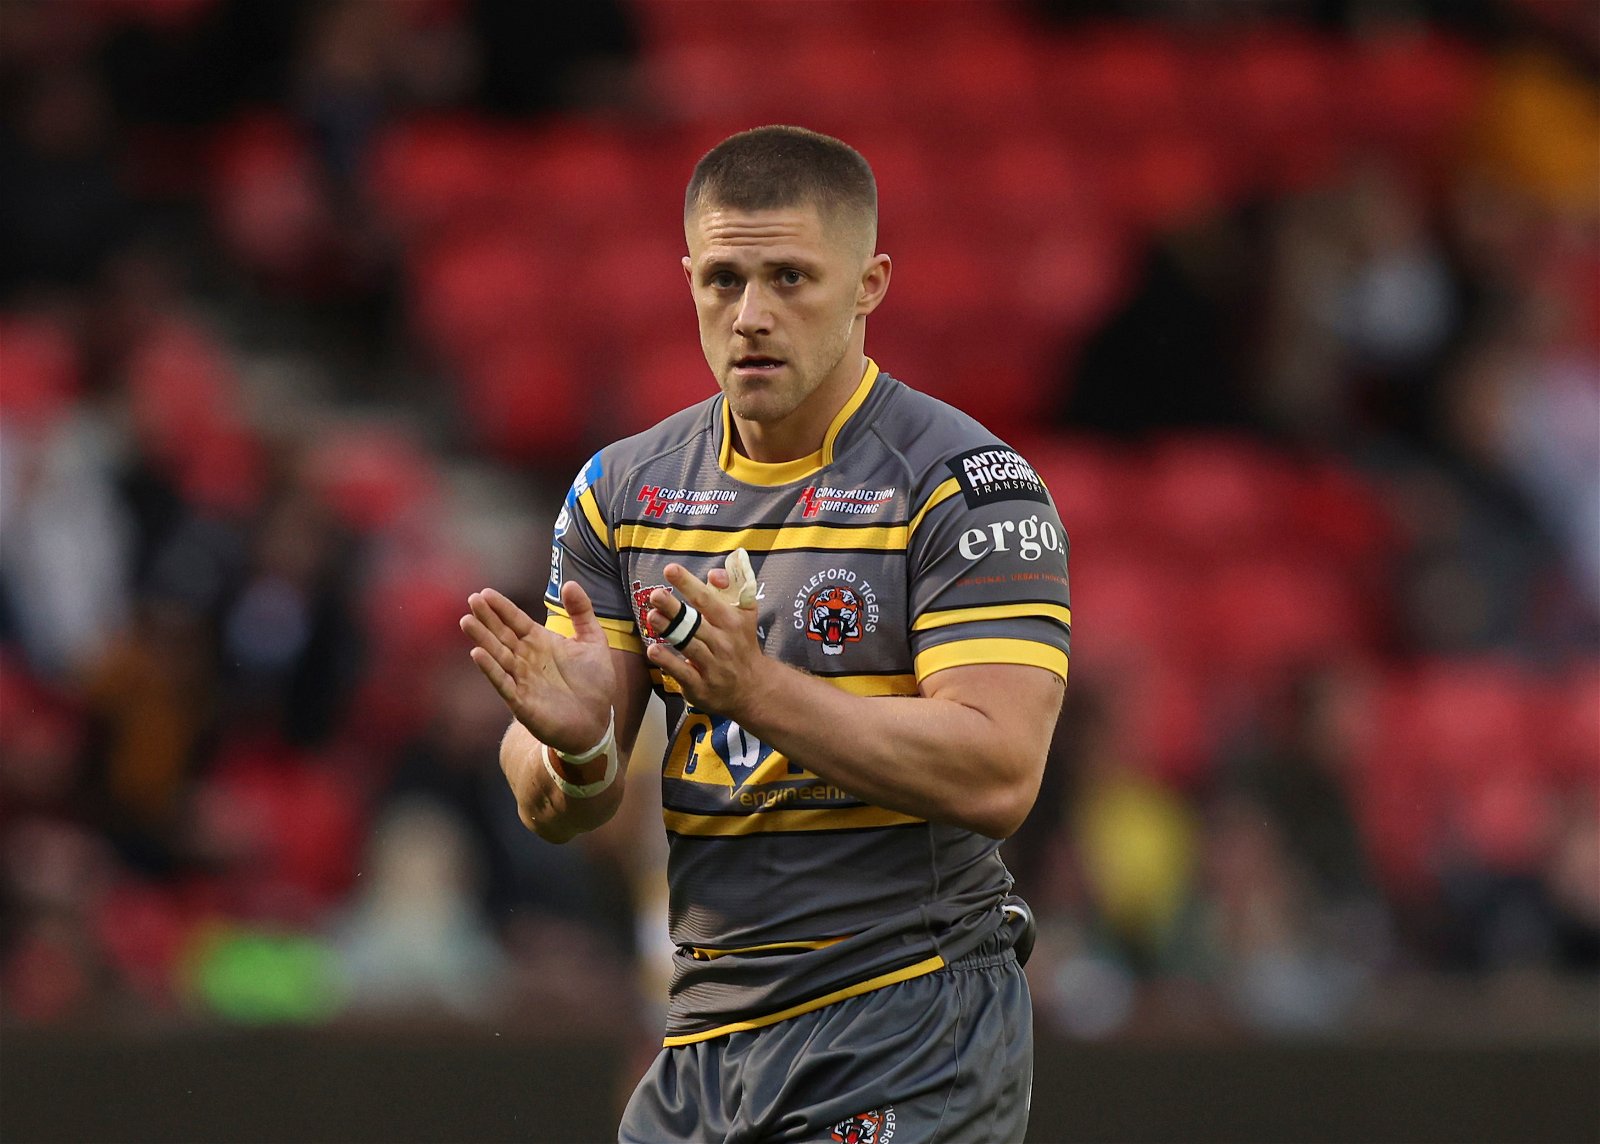 Ryan Hampshire claps while playing for Castleford Tigers, wearing a grey shirt with yellow horizontal pinstripes.